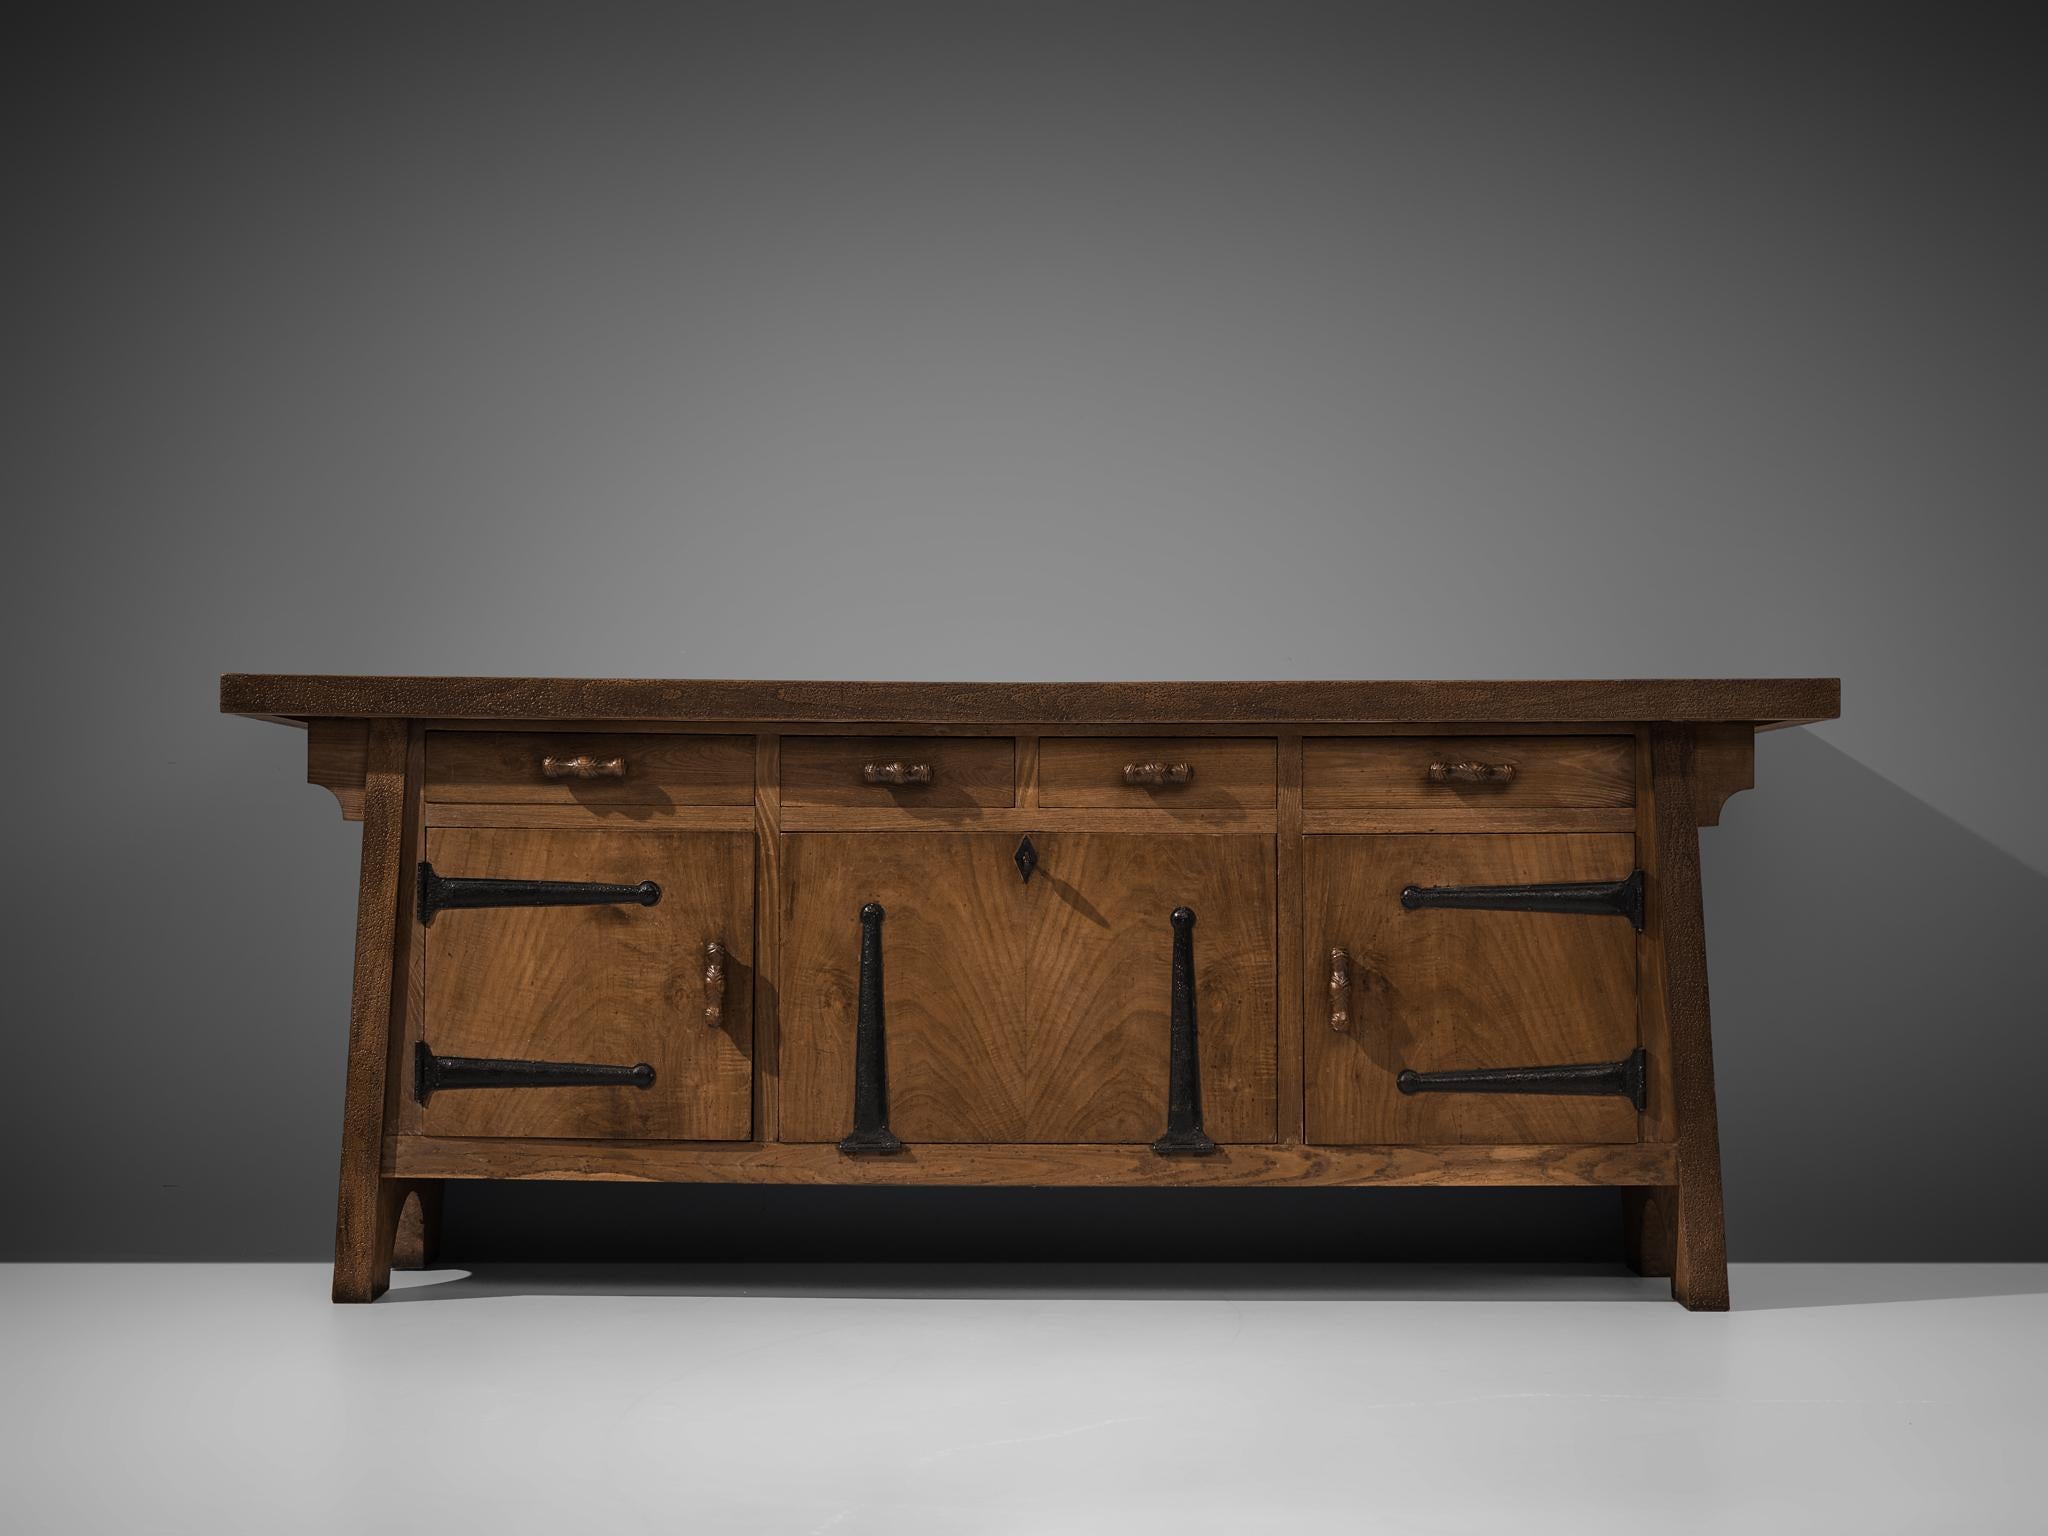 Ernesto Valabrega, large sideboard, oak, iron, Italy, ca. 1935

This large sideboard by Ernesto Valabrega features not only visual qualities but also great storage space. Four drawers and three doors are structuring the outside. The door in the